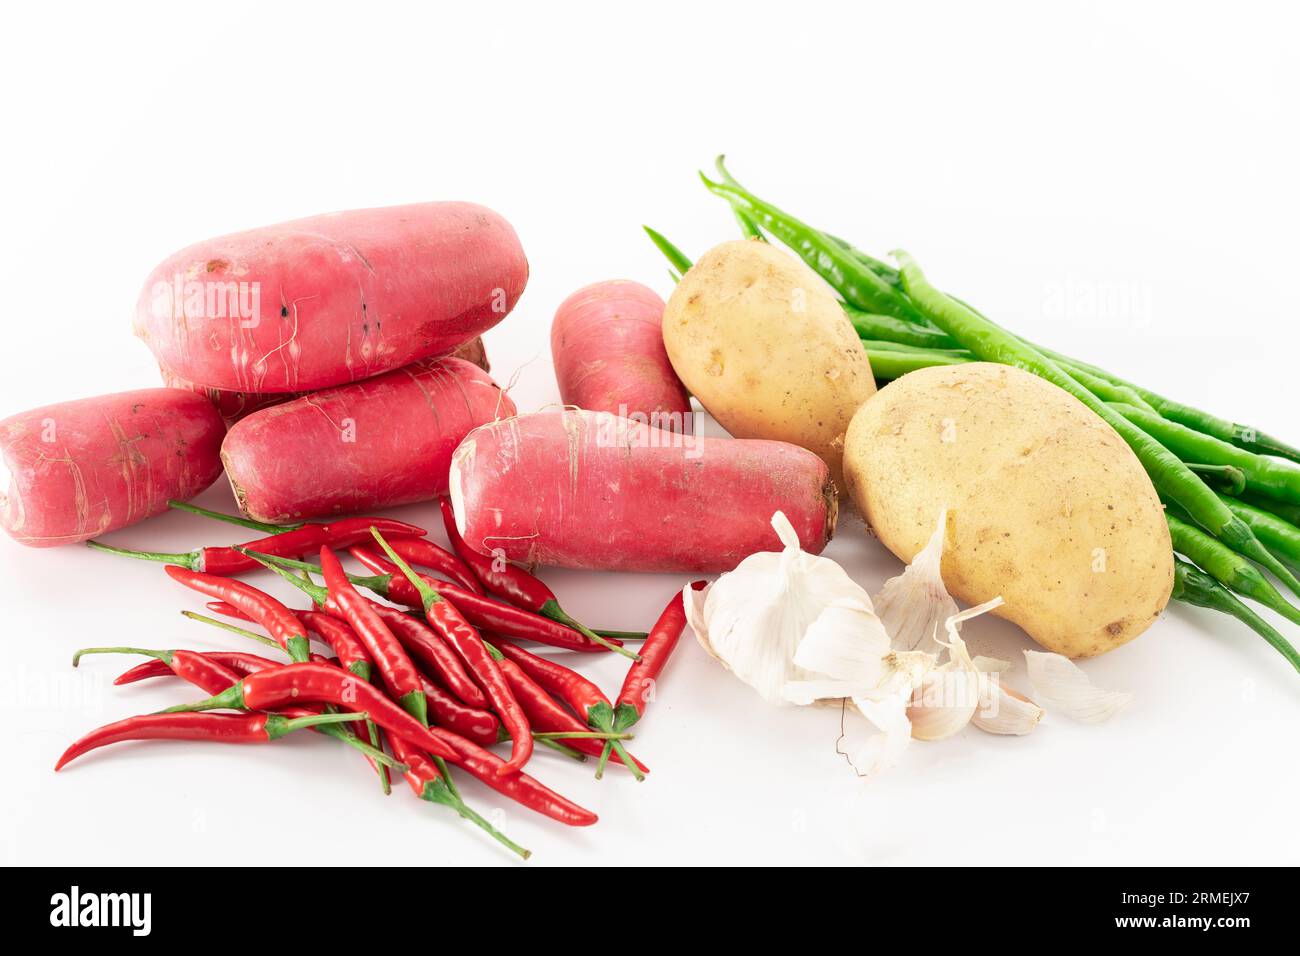 Scallions, chili peppers, radishes, potatoes, and garlic on a white background board. Stock Photo